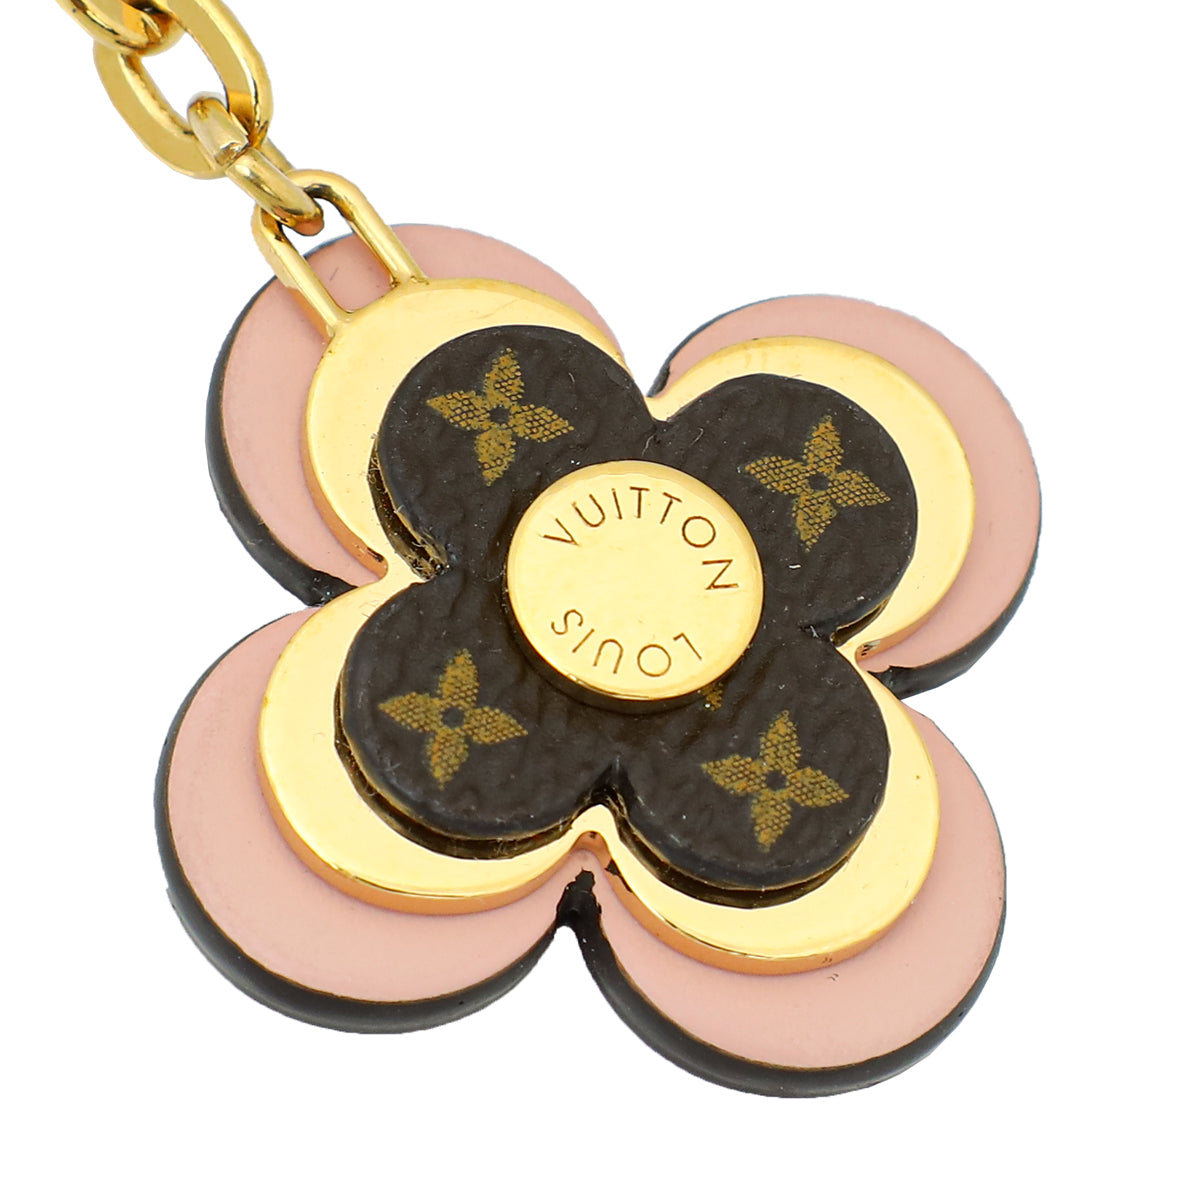 Louis Vuitton Monogram Pink Blooming Flowers BB Bag Charm and Key Holder